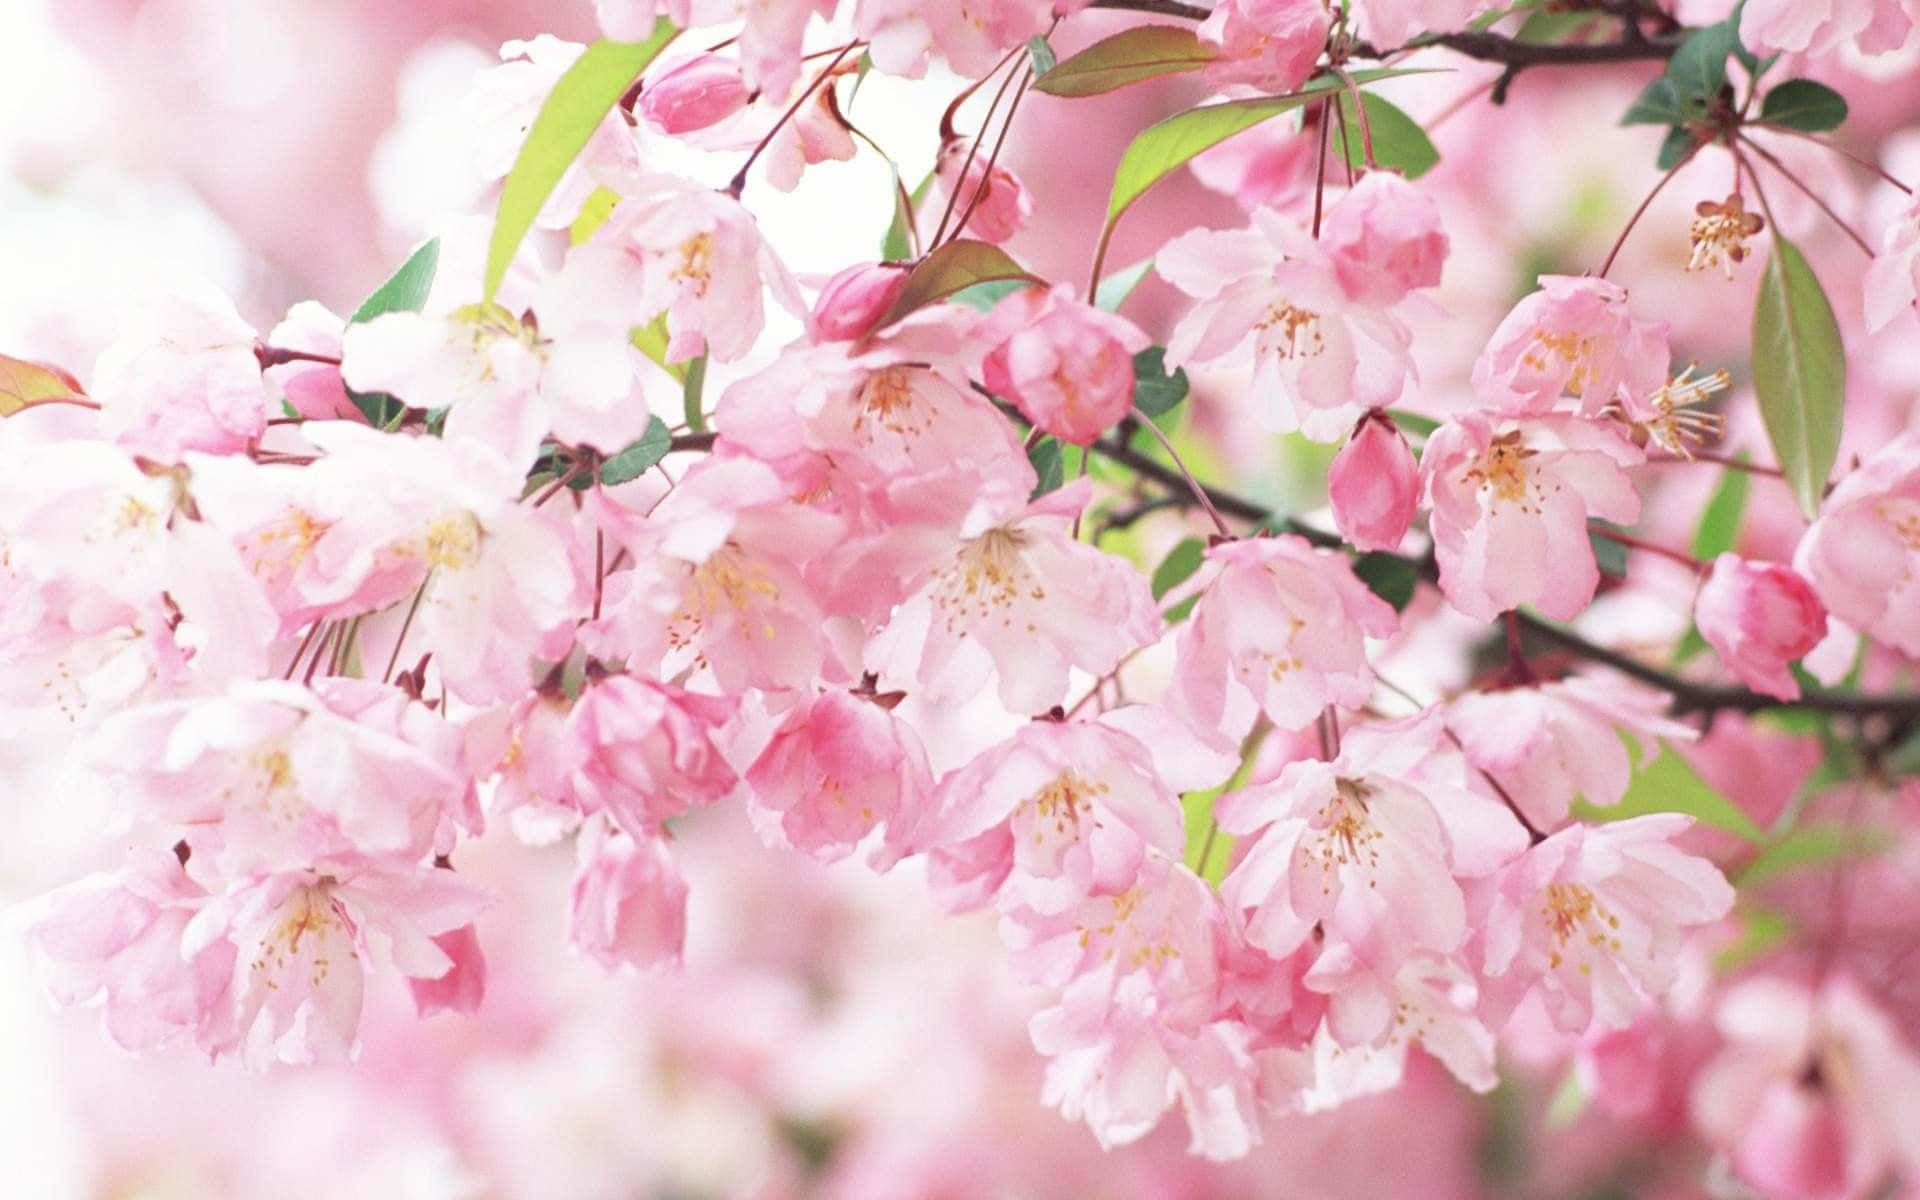 Brighten up your day with this stunning pink floral background